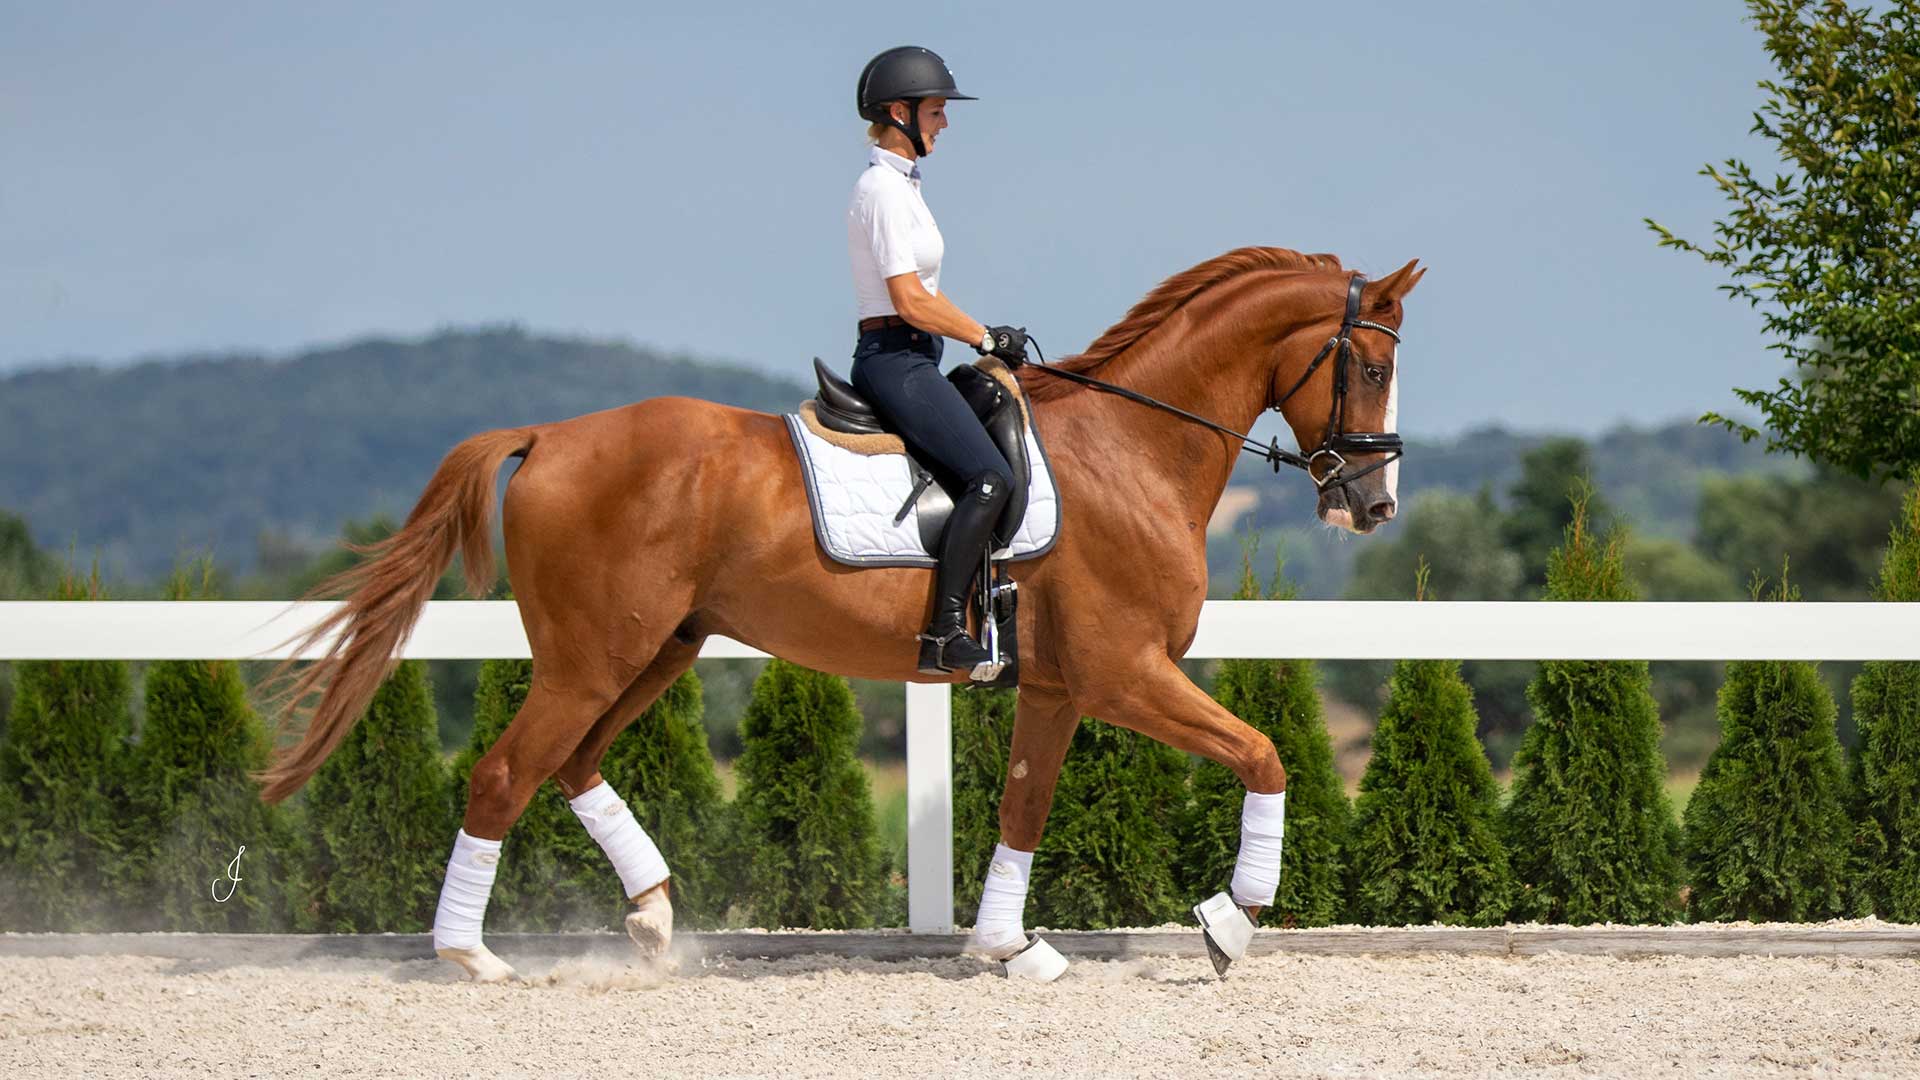 Dressage riding on a course reinforced with TTE®.